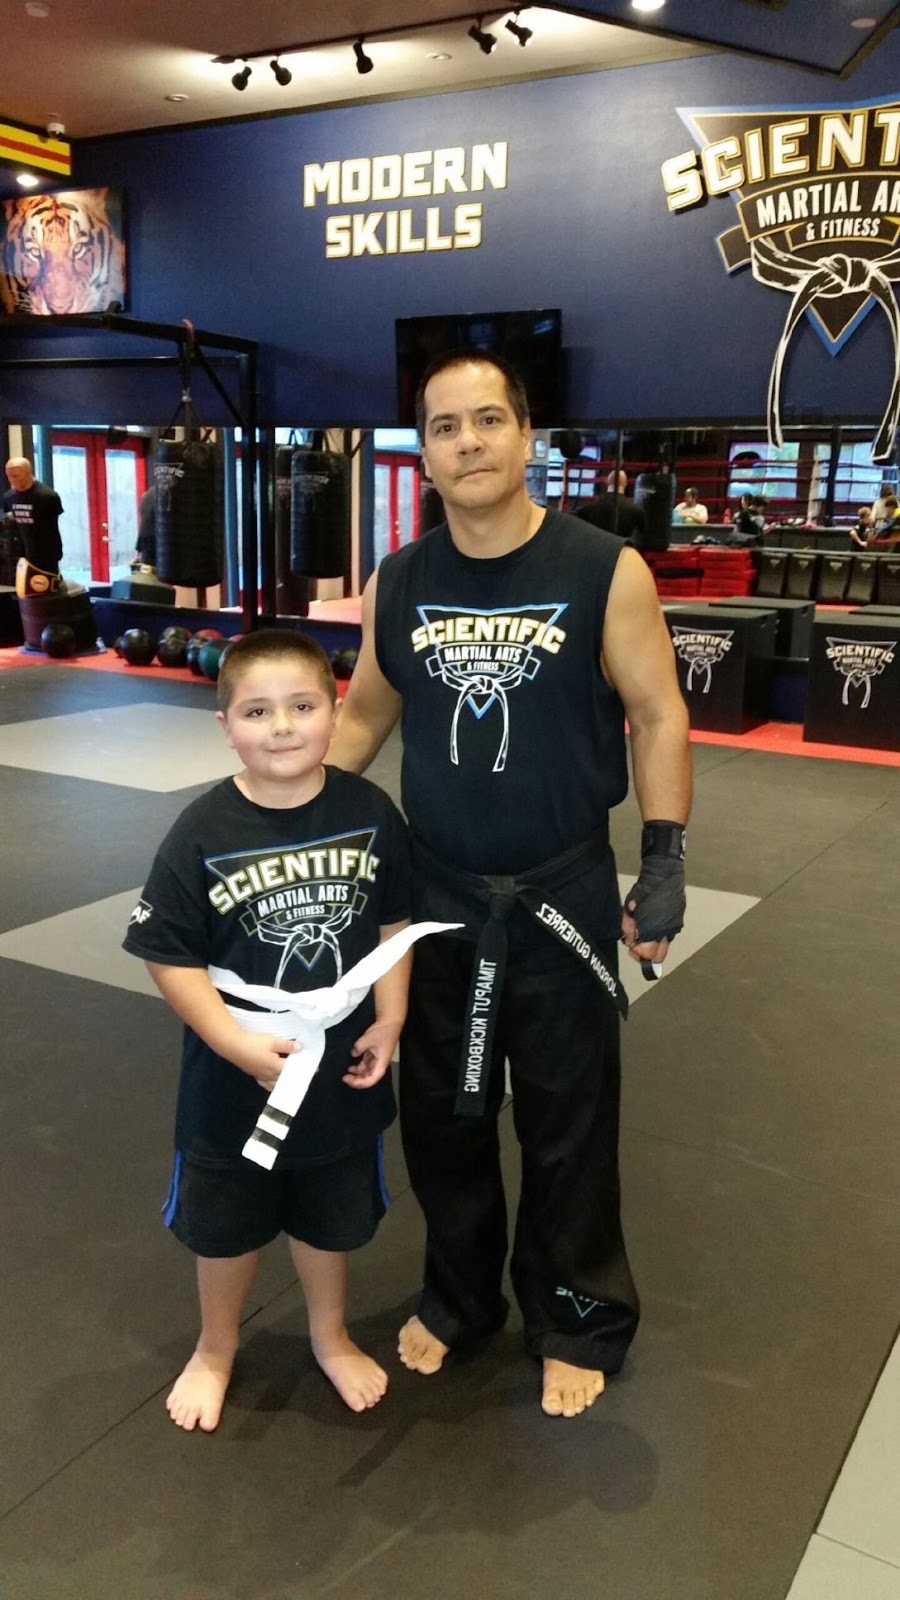 Scientific Martial Arts and Fitness | 440 Garland Dr unit c, Northglenn, CO 80233, USA | Phone: (303) 451-5131